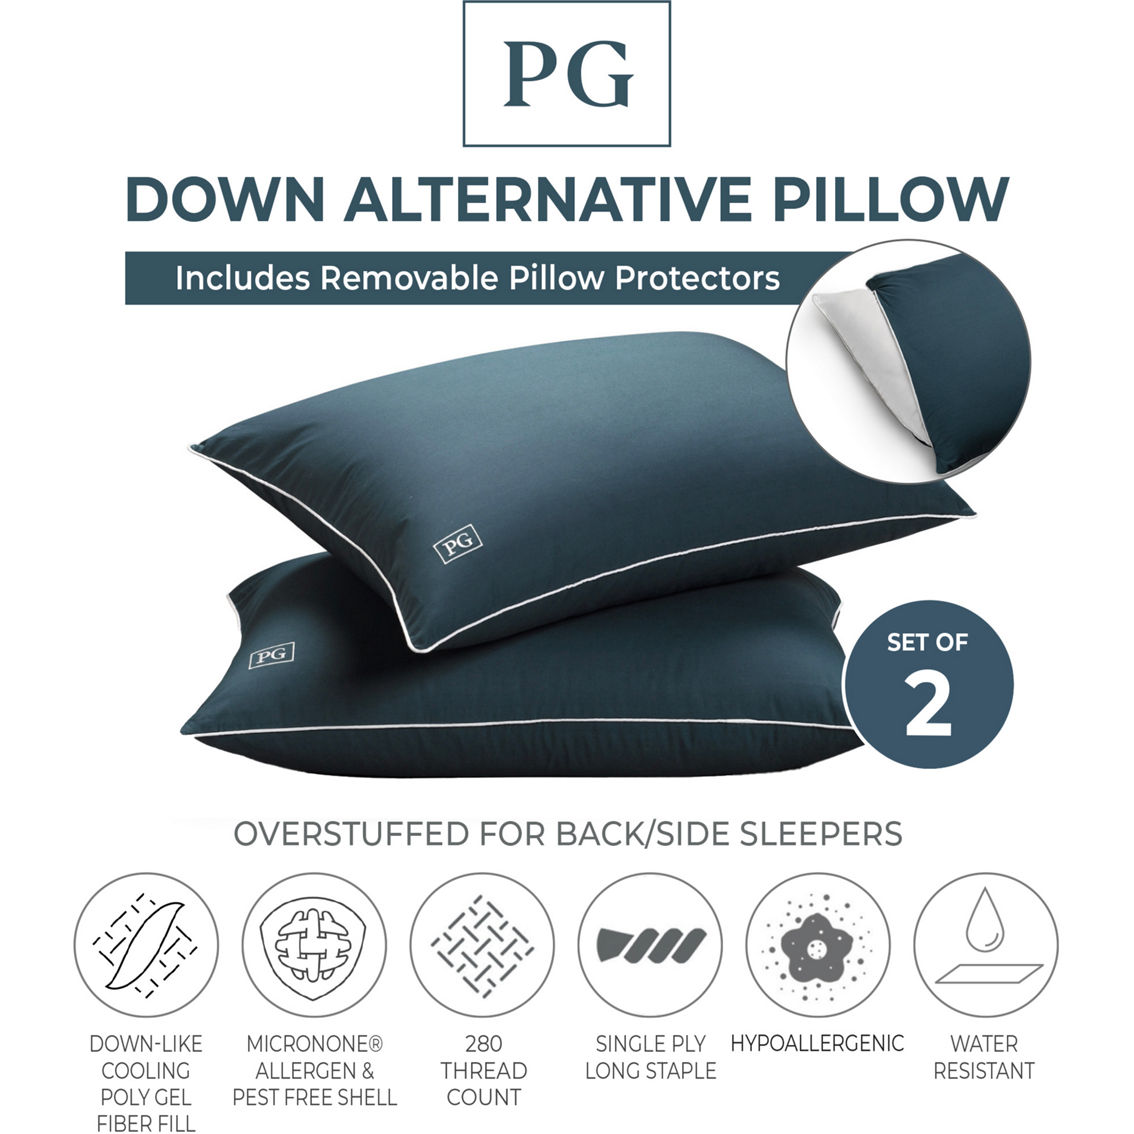 Pillow Guy Down Alternative Pillow with Removable Pillow Protector - Image 3 of 7